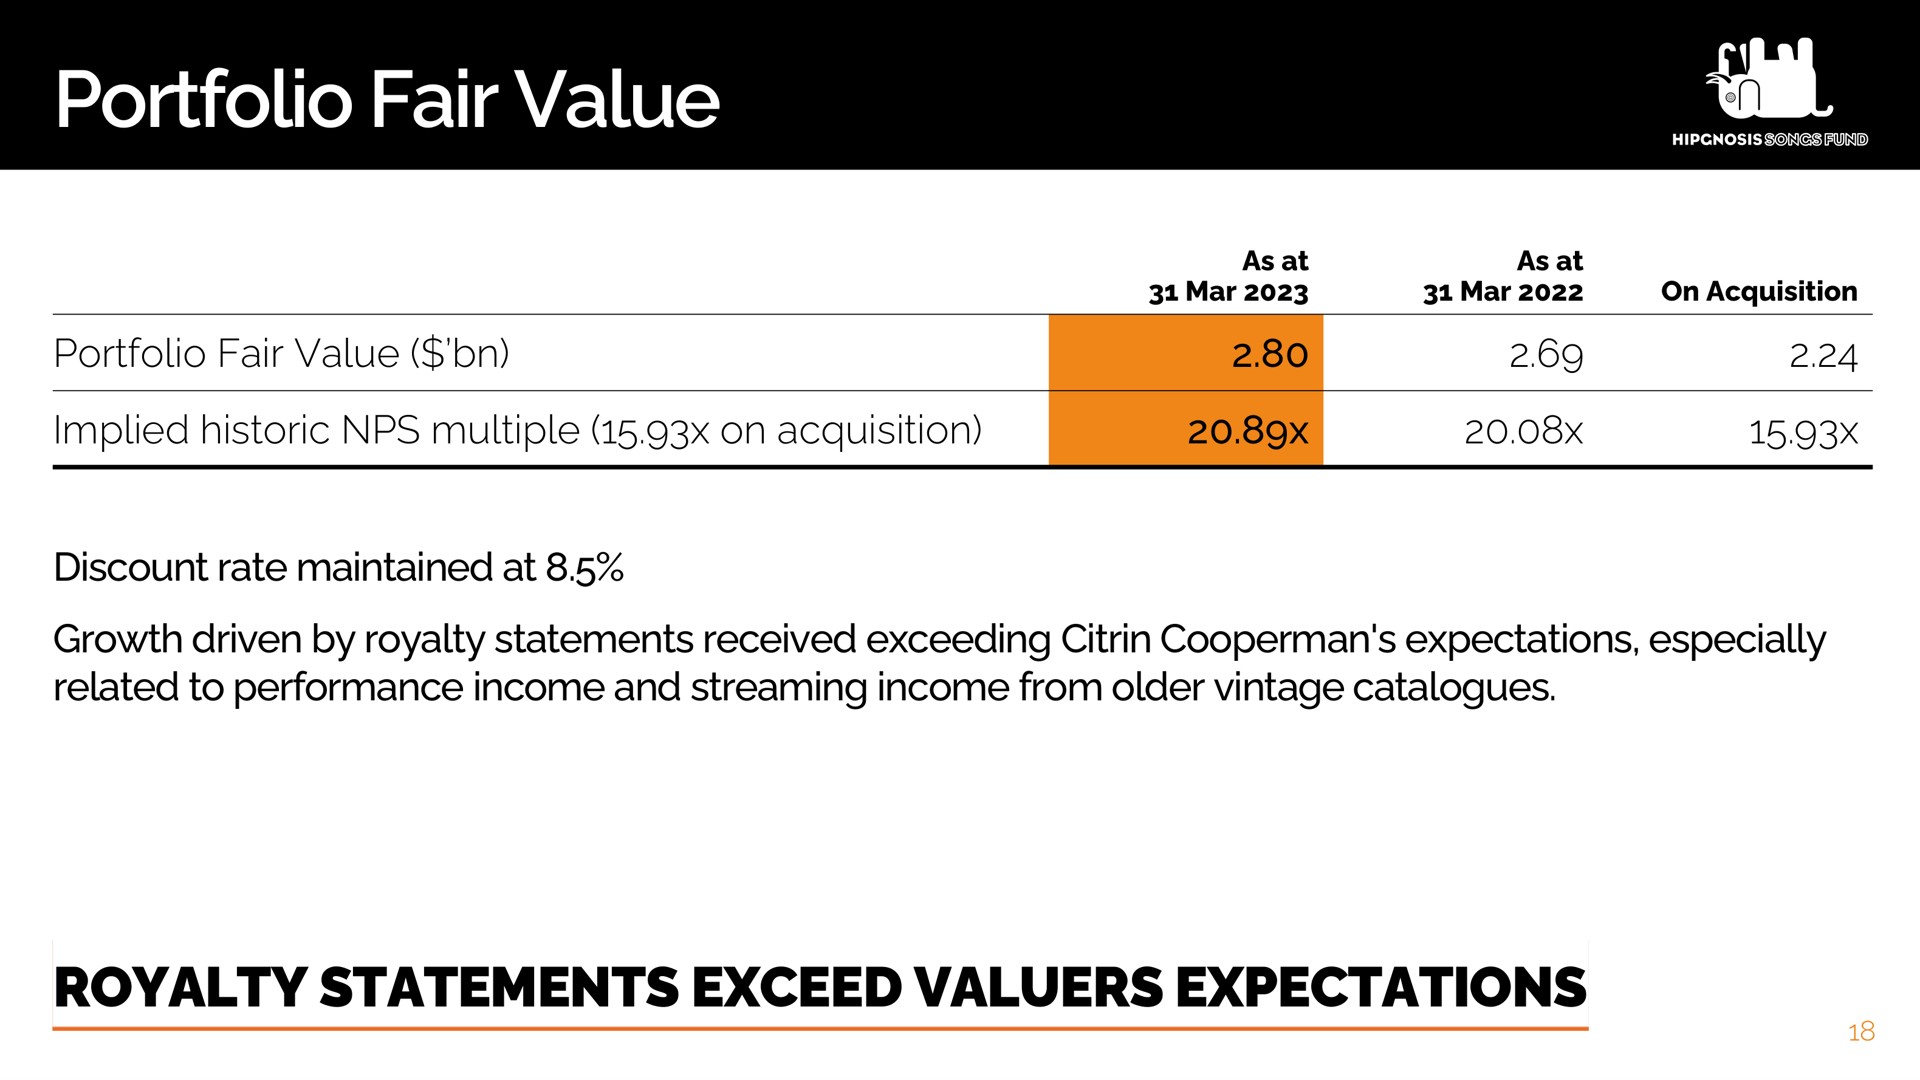 portfolio fair value royalty statements exceed valuers expectations | Hipgnosis Songs Fund